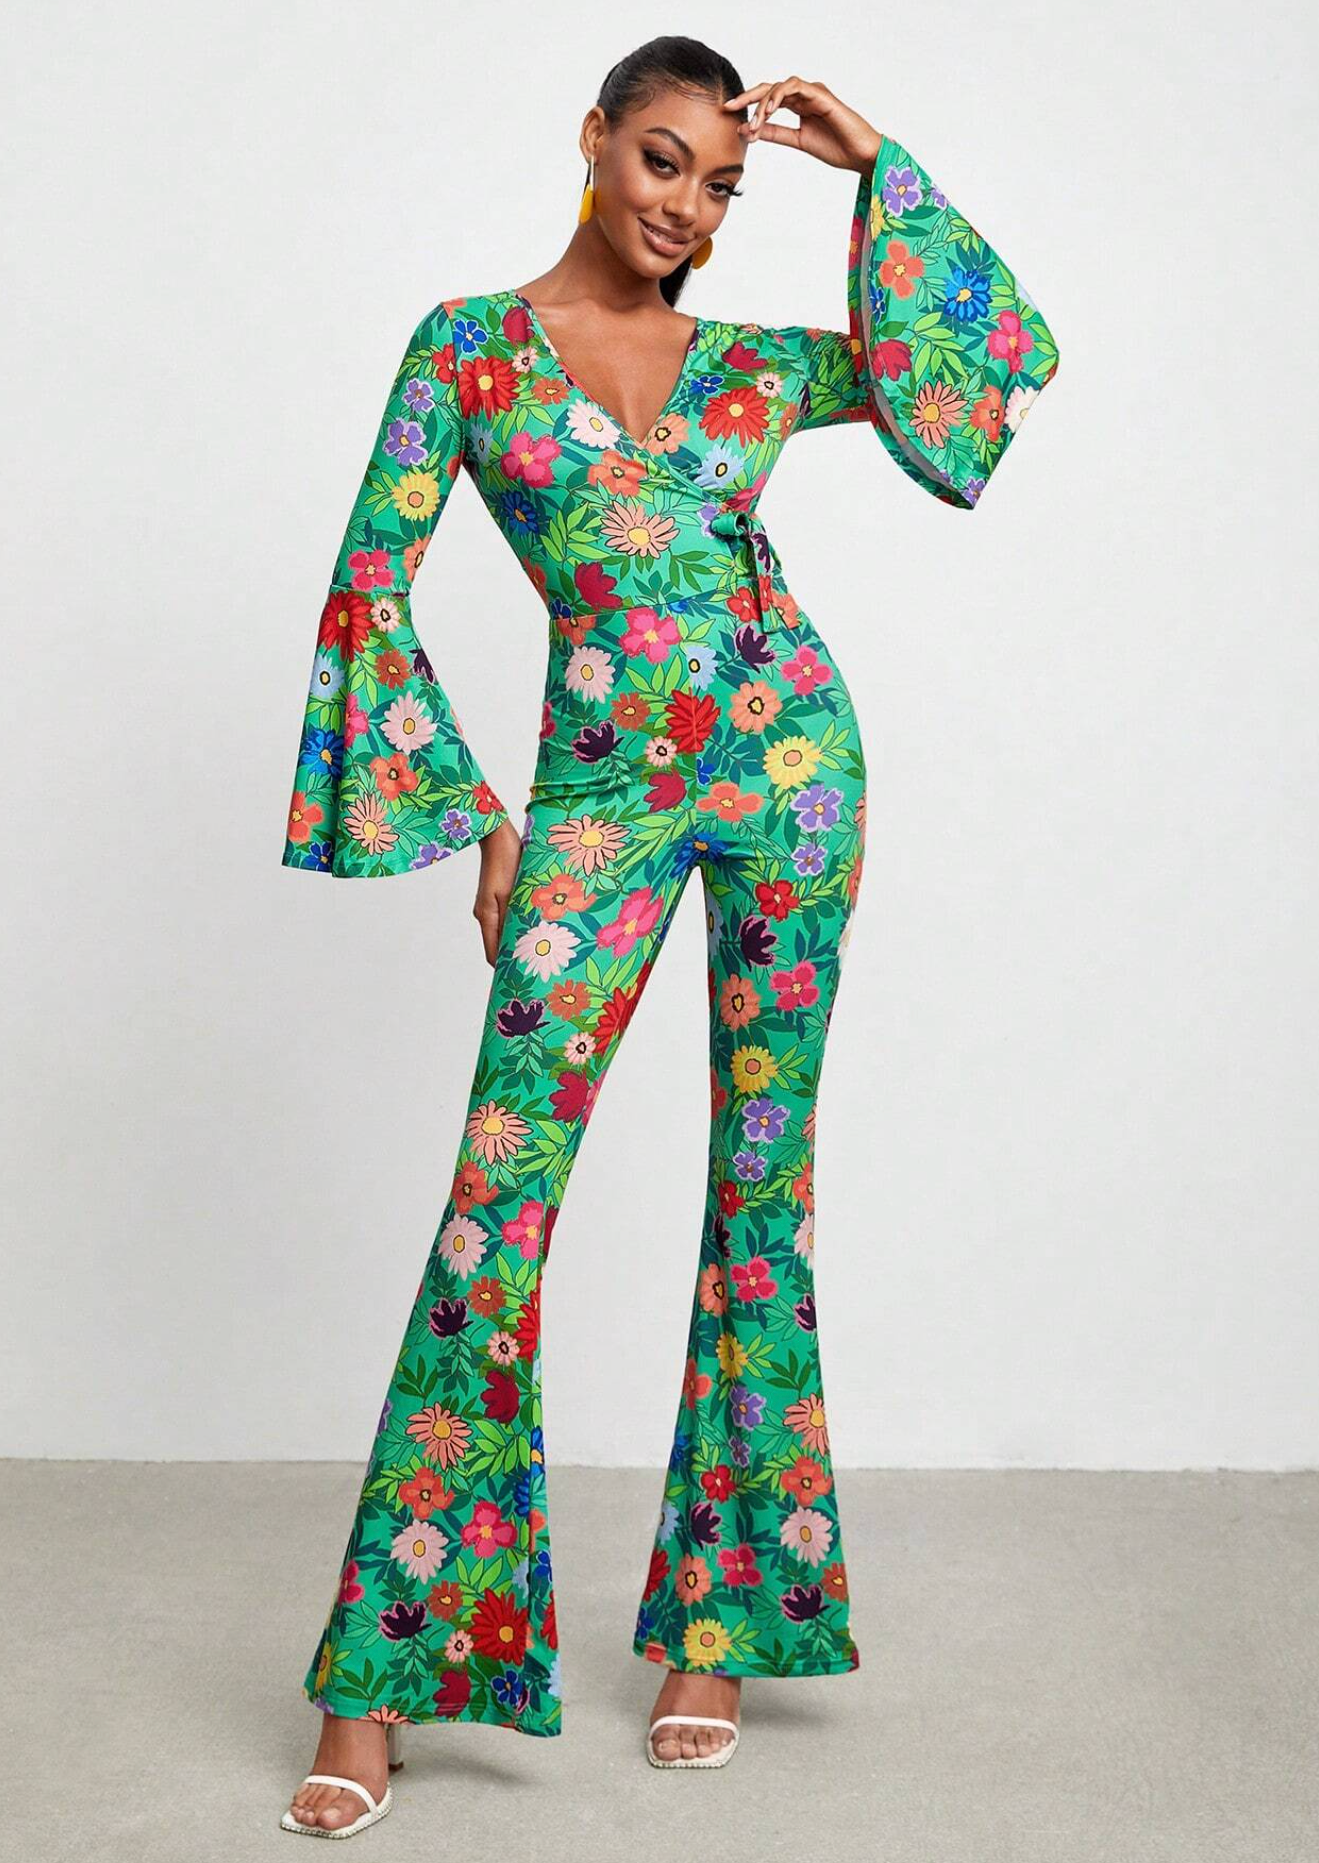 BELANGE HANDMADE X SHEIN - Floral Print Flare Leg Jumpsuit- Available on SHEIN.COM Only